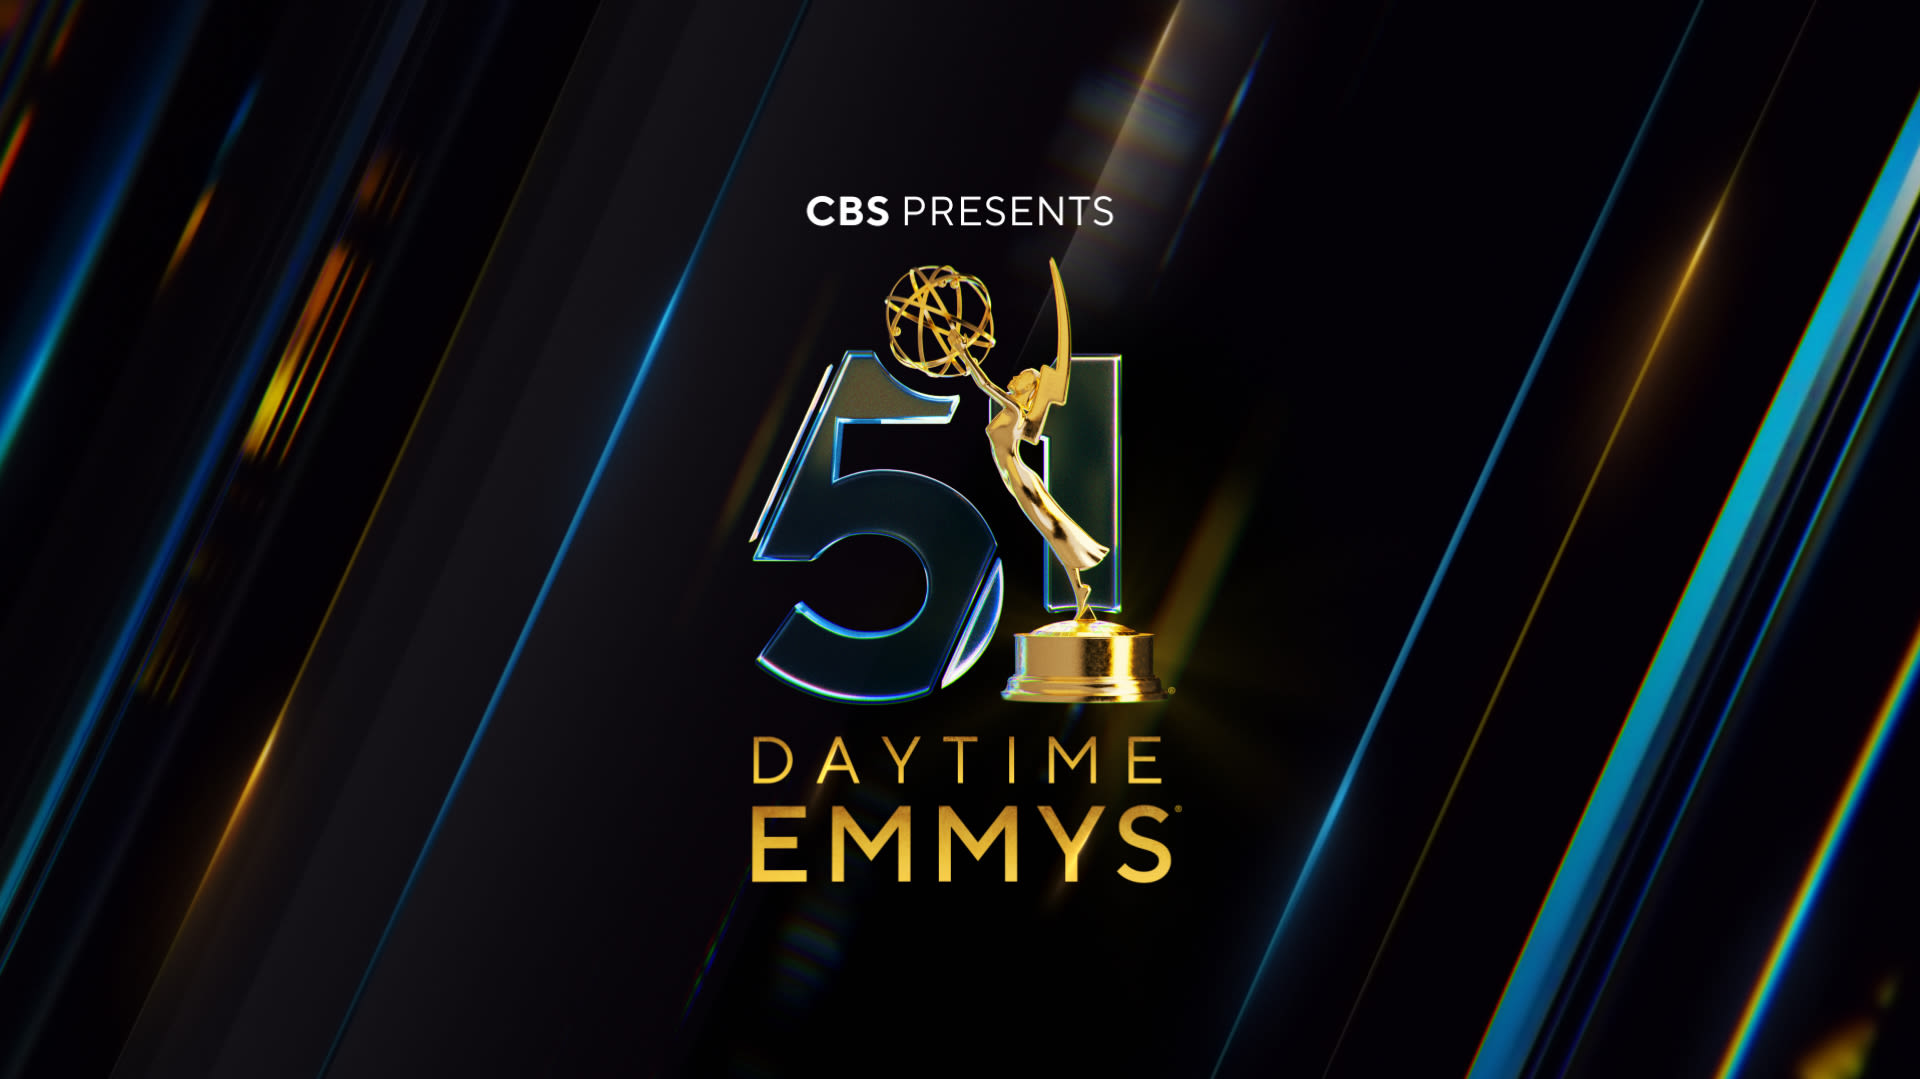 Daytime Emmys: ‘General Hospital’ Wins For Outstanding Drama; ‘The Kelly Clarkson’ Show Wins For Fourth Consecutive Year